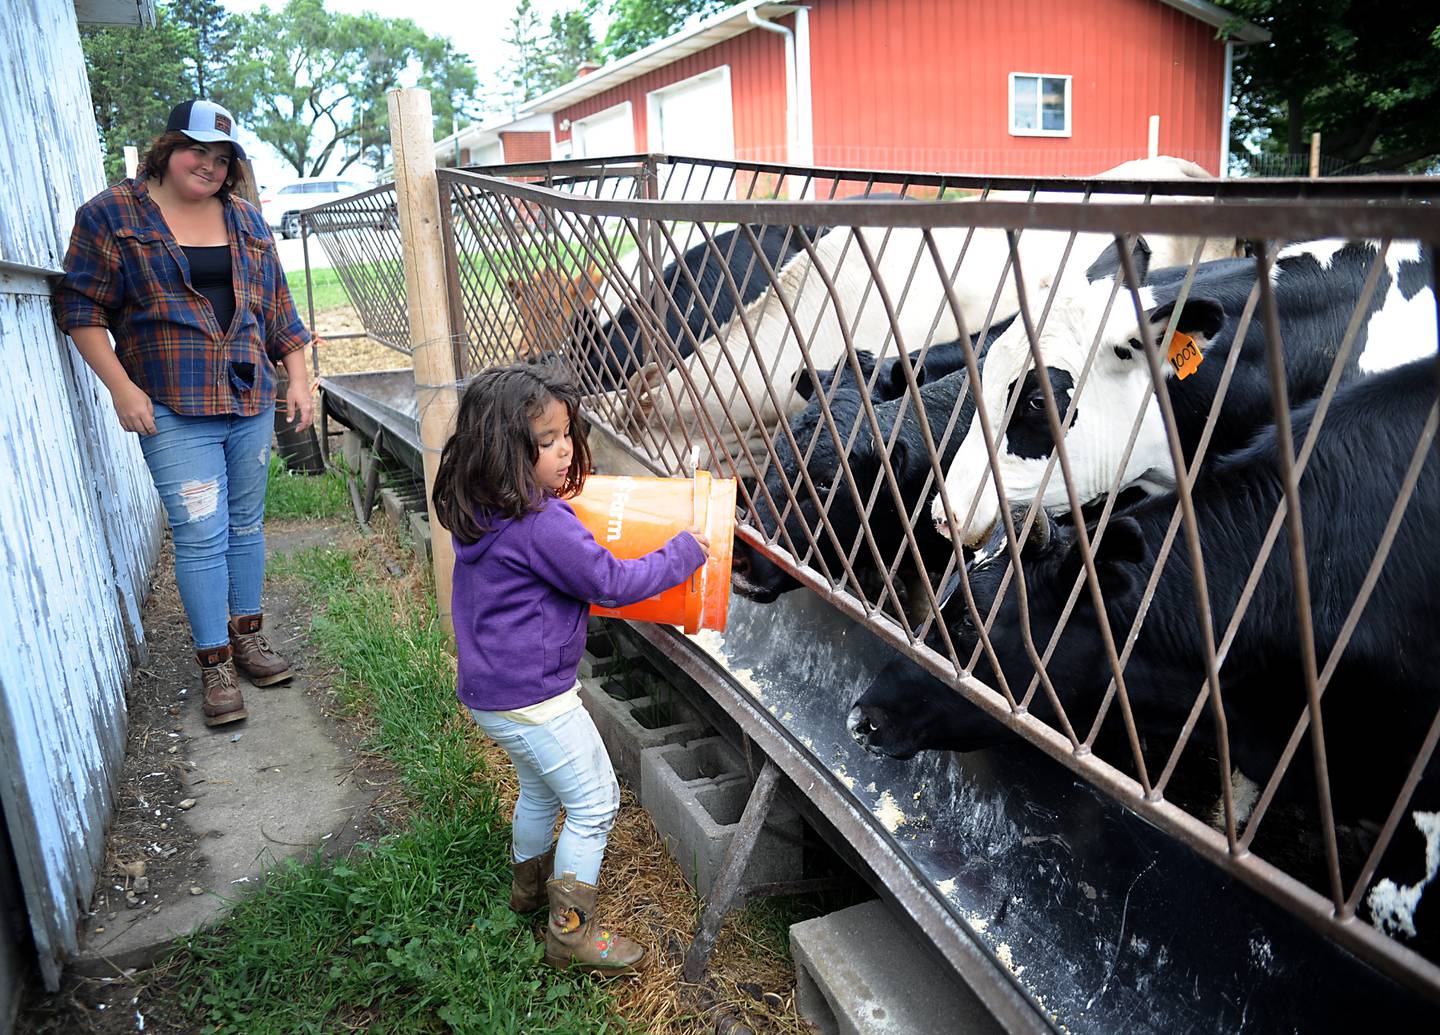 Destiny West watches as her daughter, Raylee Kelly, 4, feeds the cattle Friday, June 10, 2022, on the Jacobson farm near Richmond. West's fiance, Bryon Kelly, inherited the century-old farm from his step-grandfather Richard Jacobson.